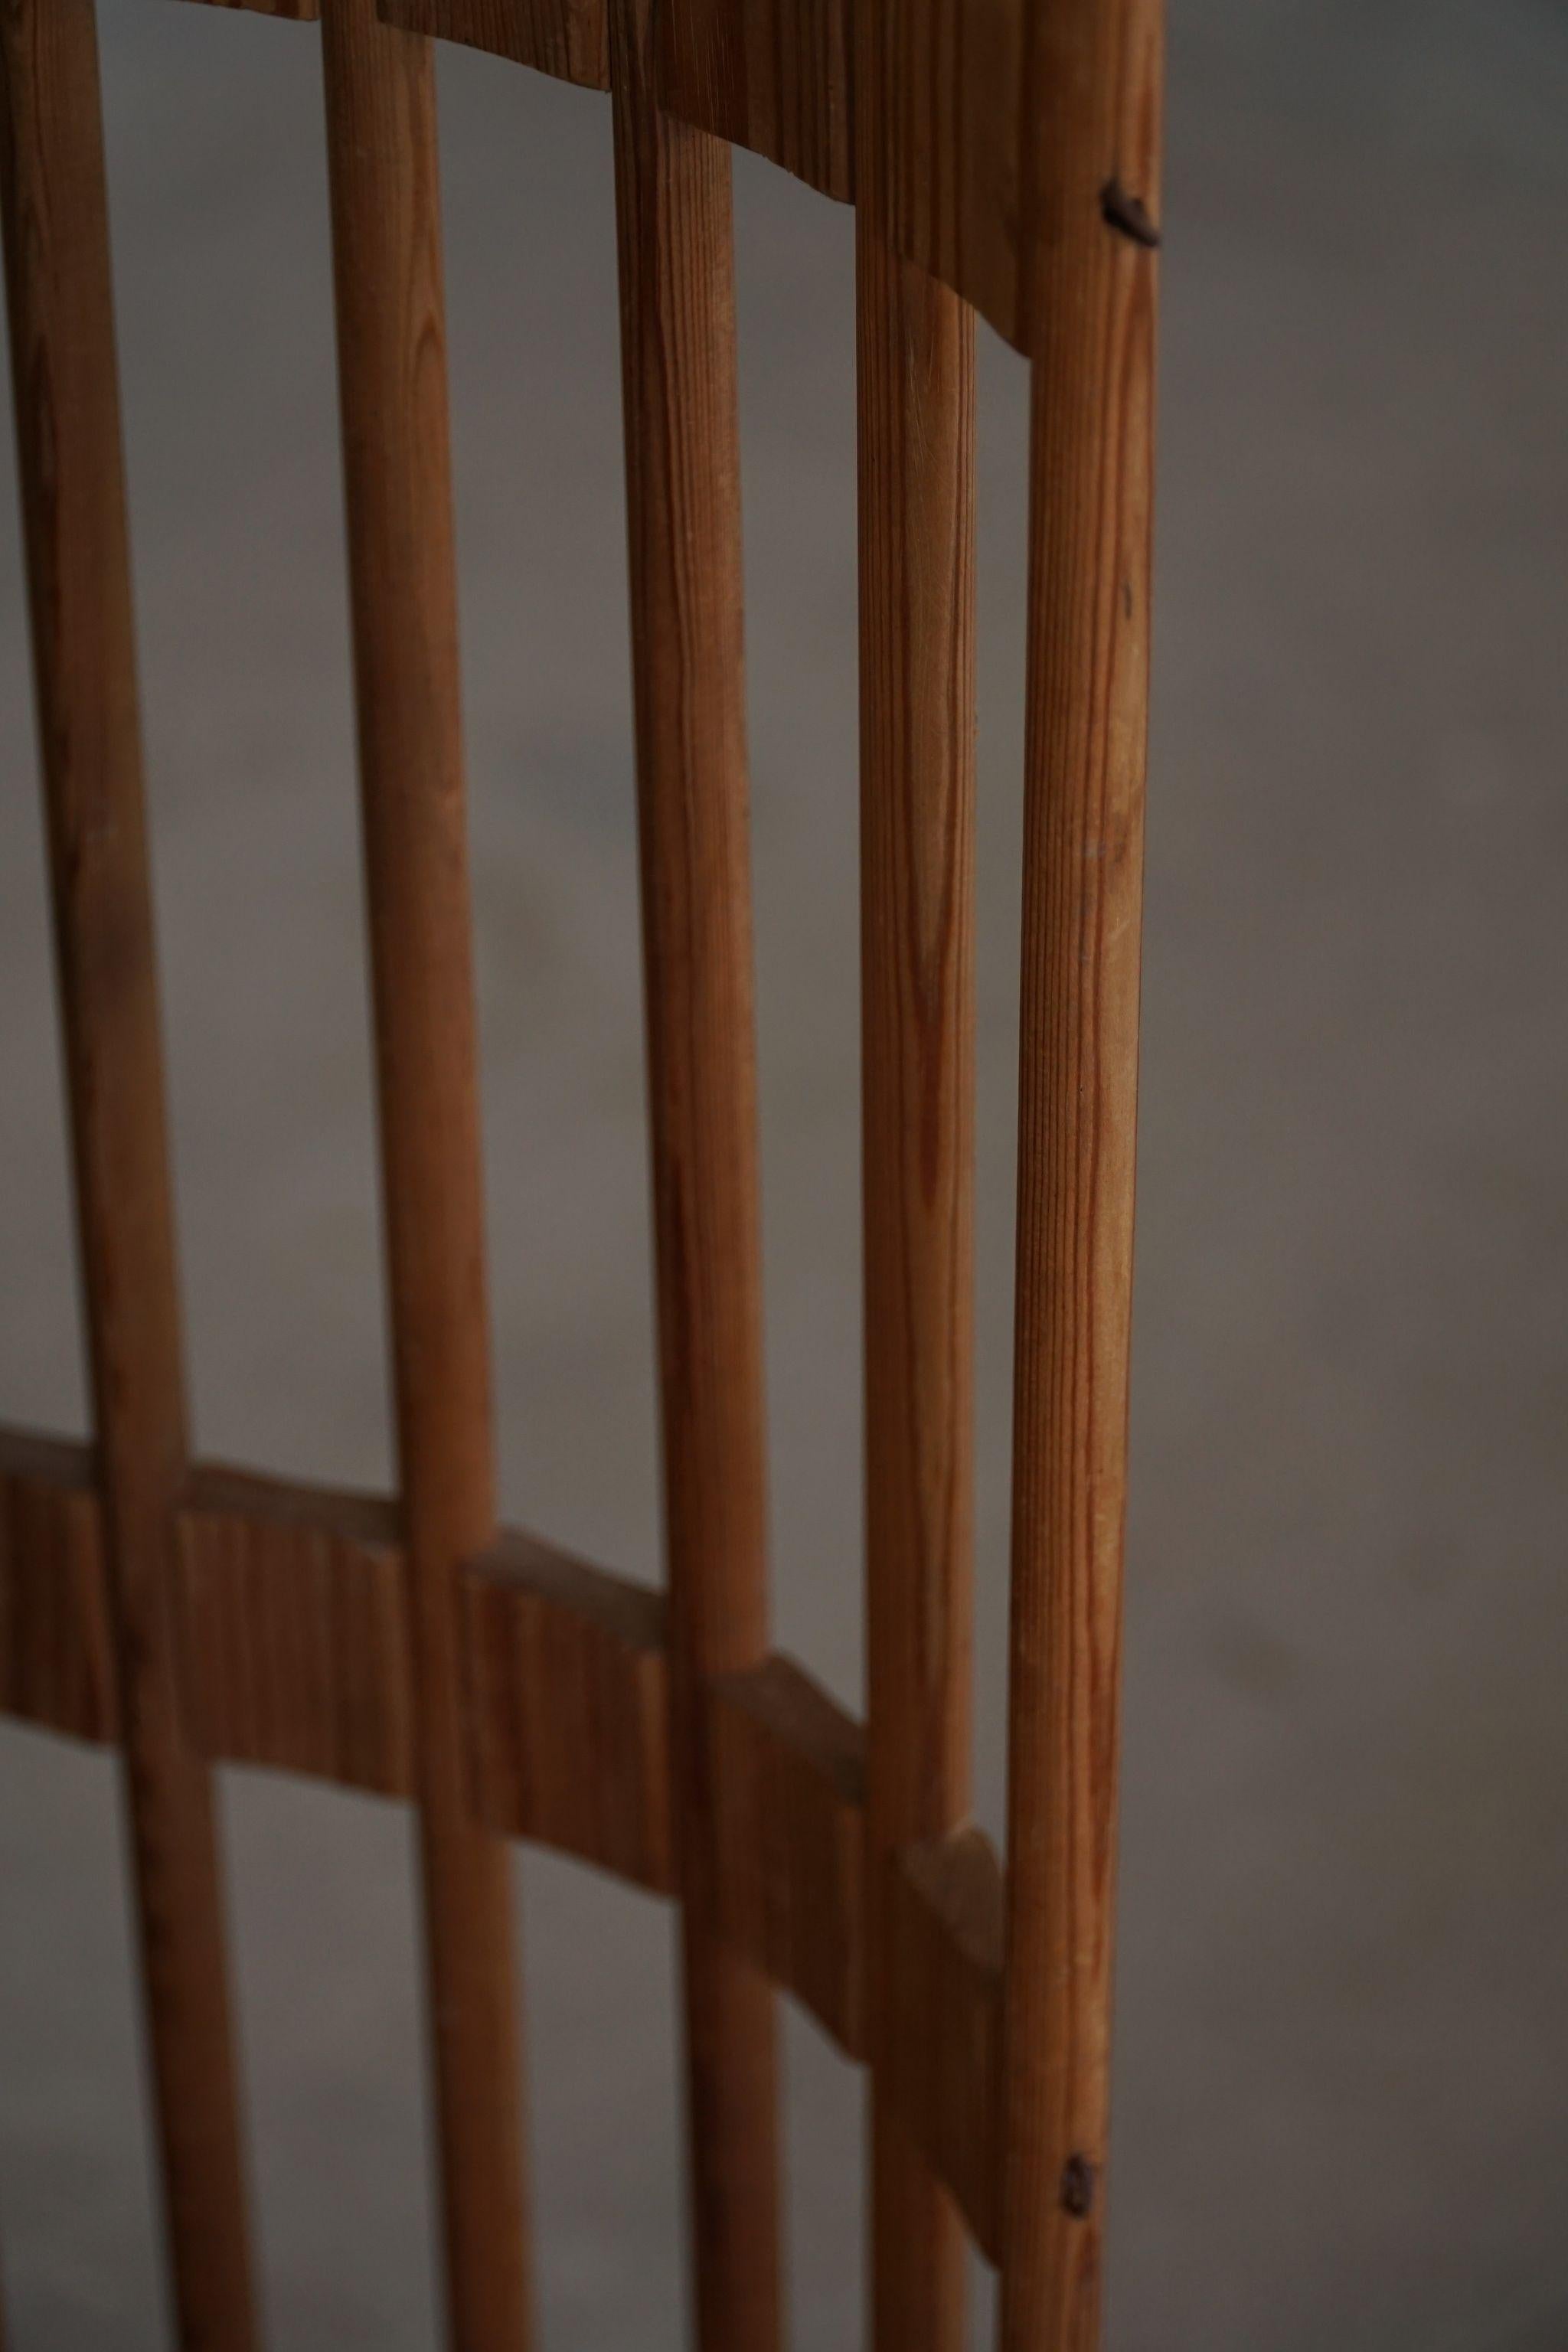 Danish Modern Sculptural Folding Screen / Room Divider in Pine, Made in 1960s For Sale 2